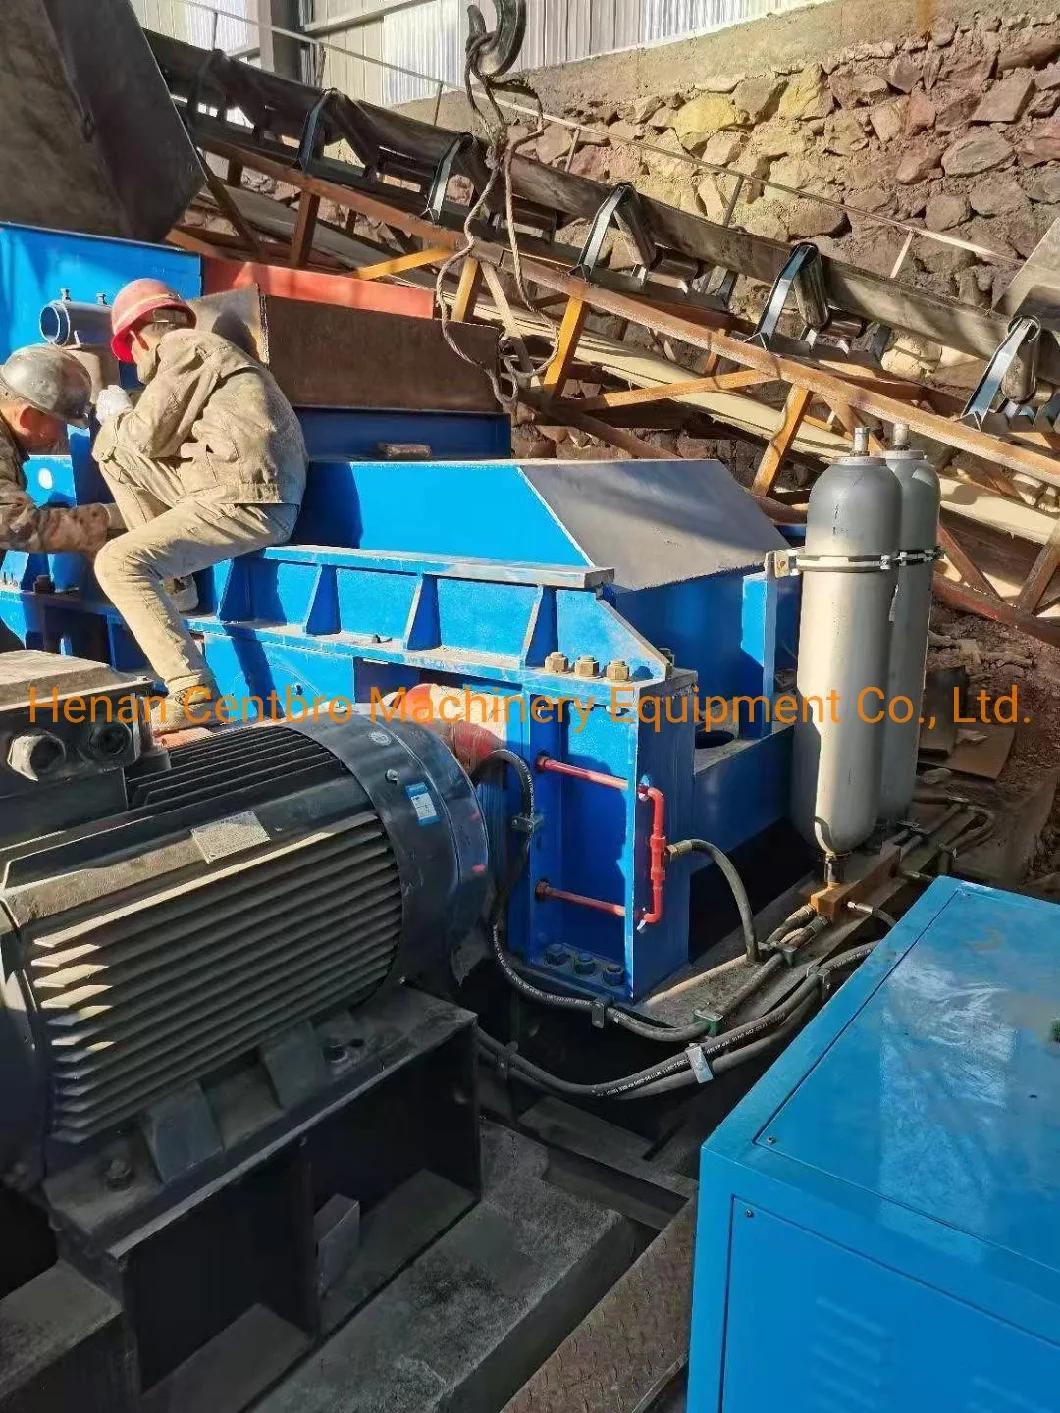 Hot Selling Rock Crushing Equipment Small Size Double Roll Crusher for Sale 2pg